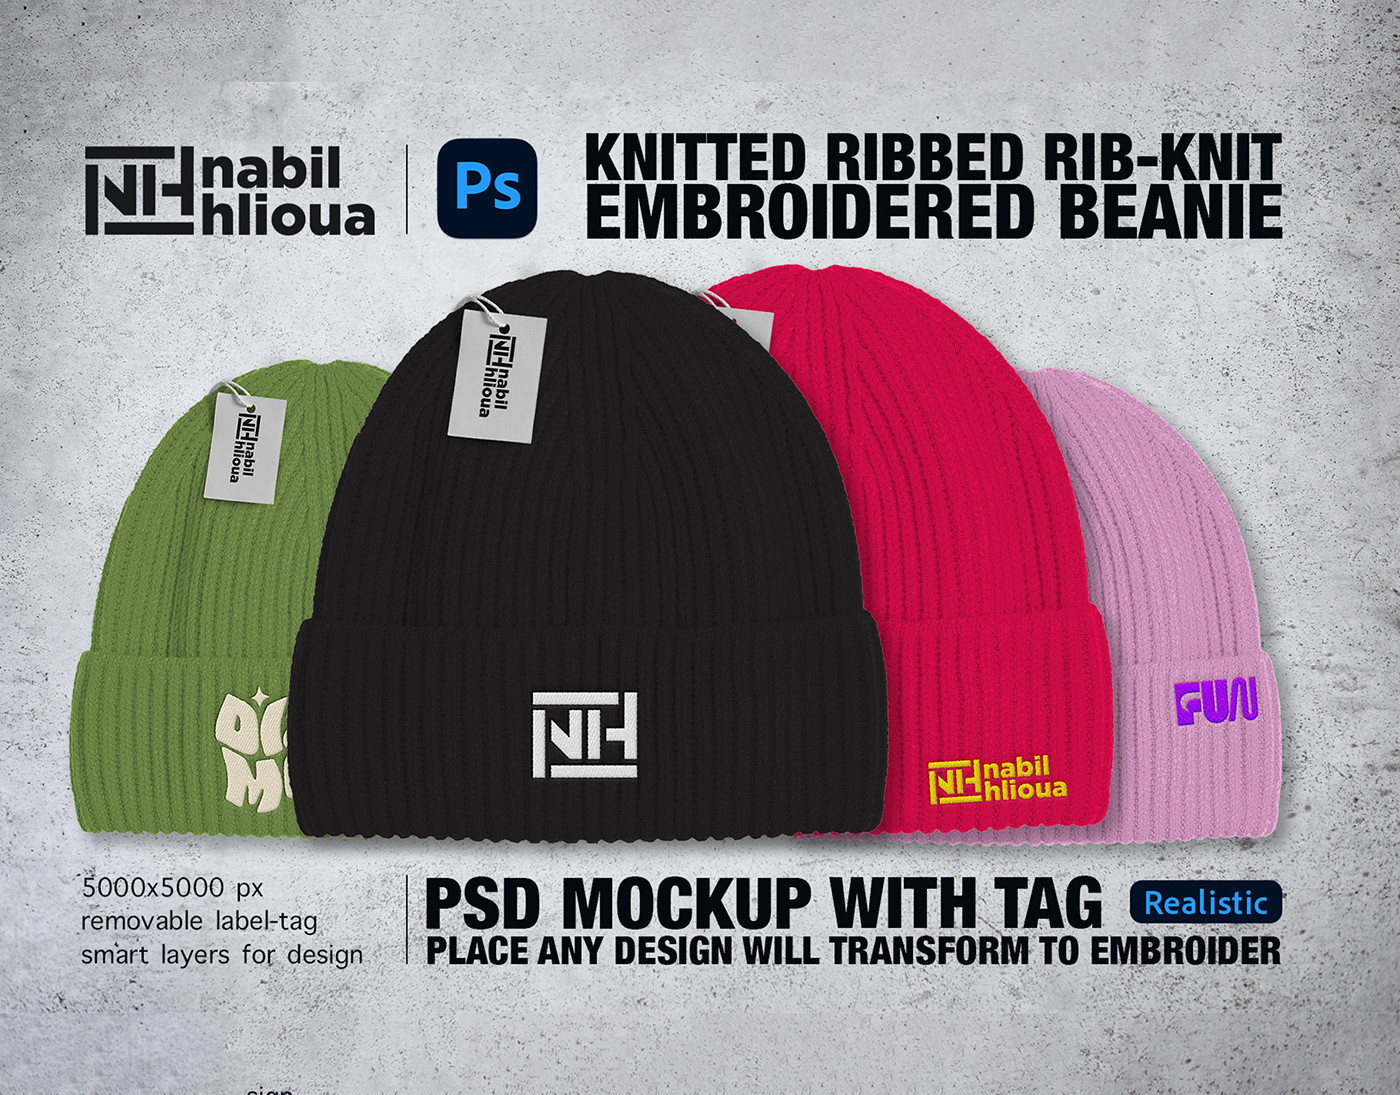 Beanie Mockup Psd Beanie Psd Files Customizable Beanie Embroidered Beanie Embroidery Beanie graphic beanie designs Knitted Ribbed Men's And Women's Beanie realistic beanie mockup Rib-knit Beanie